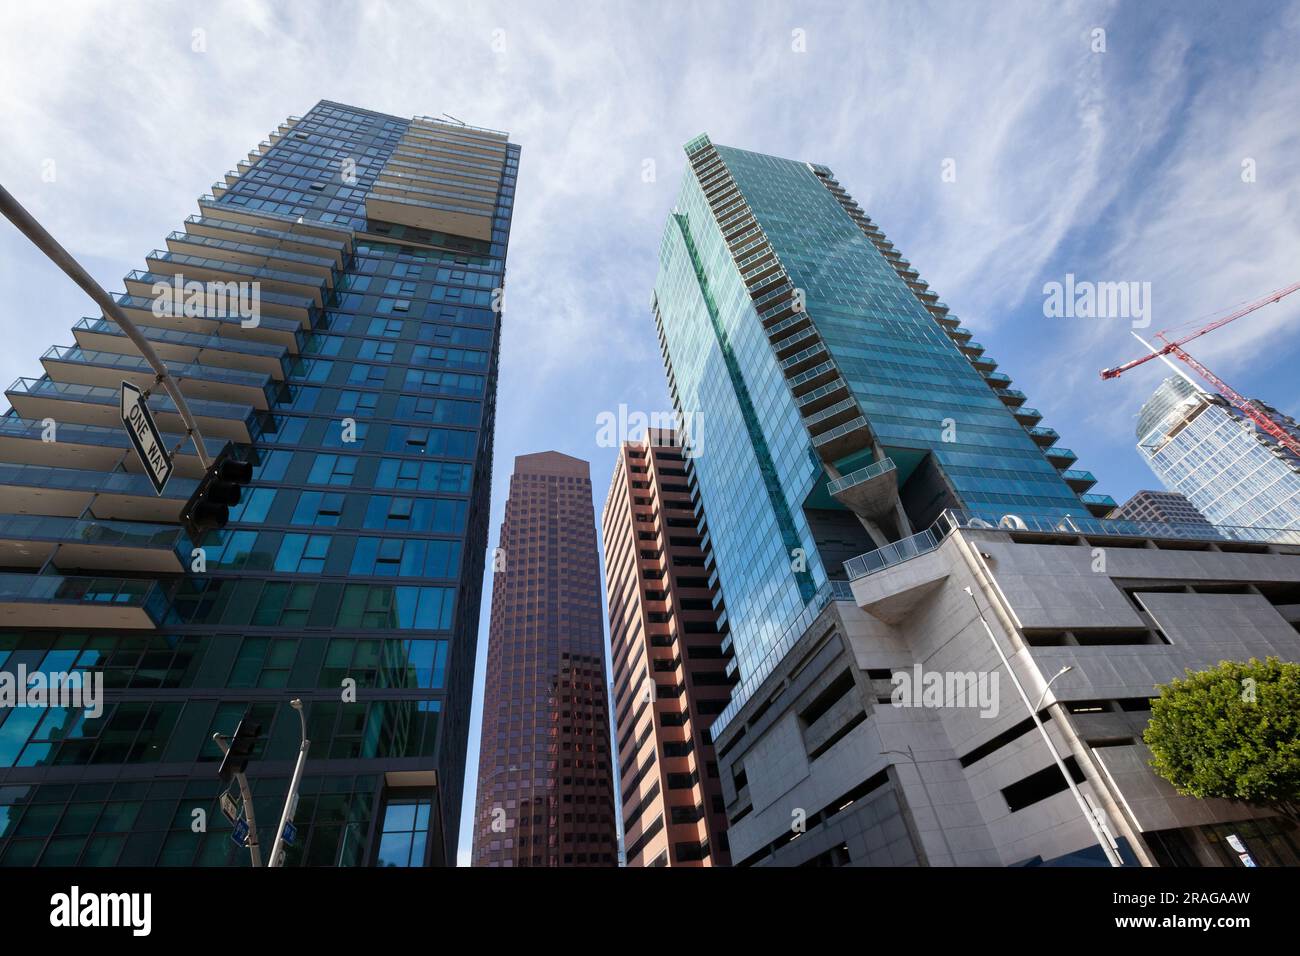 Alina Los Angeles Residenzen, TCW Tower, Federal Bank Building und Water Tower Building in Downtown Los Angeles, CA, USA Stockfoto